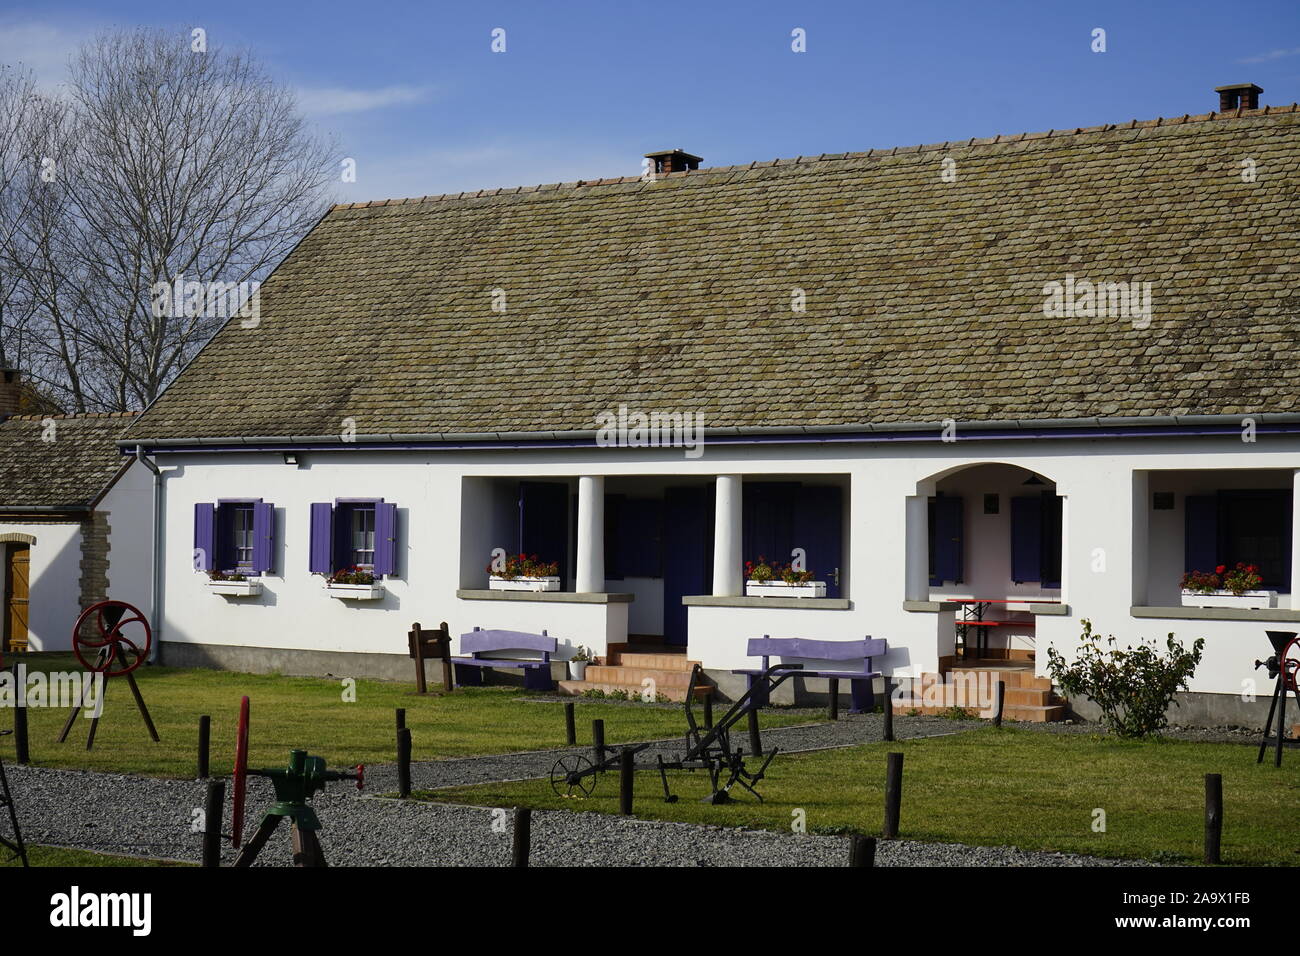 Zichy Hotel Ungherese farm house Foto Stock